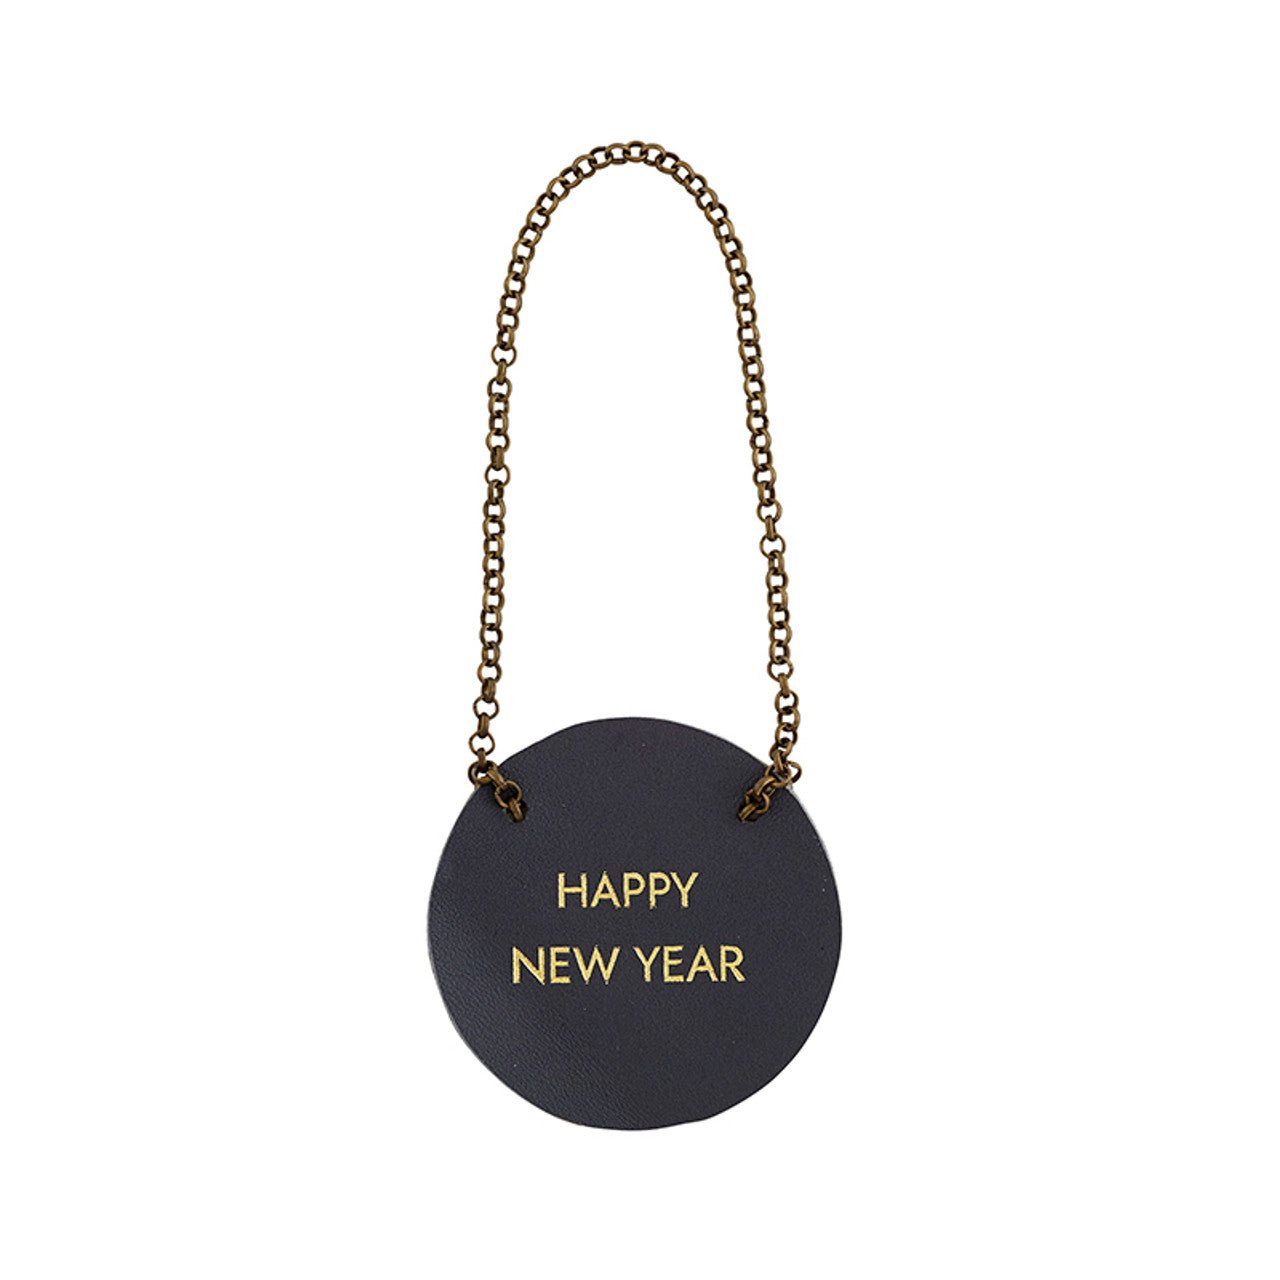 Happy New Year Leather Wine Bottle Tag